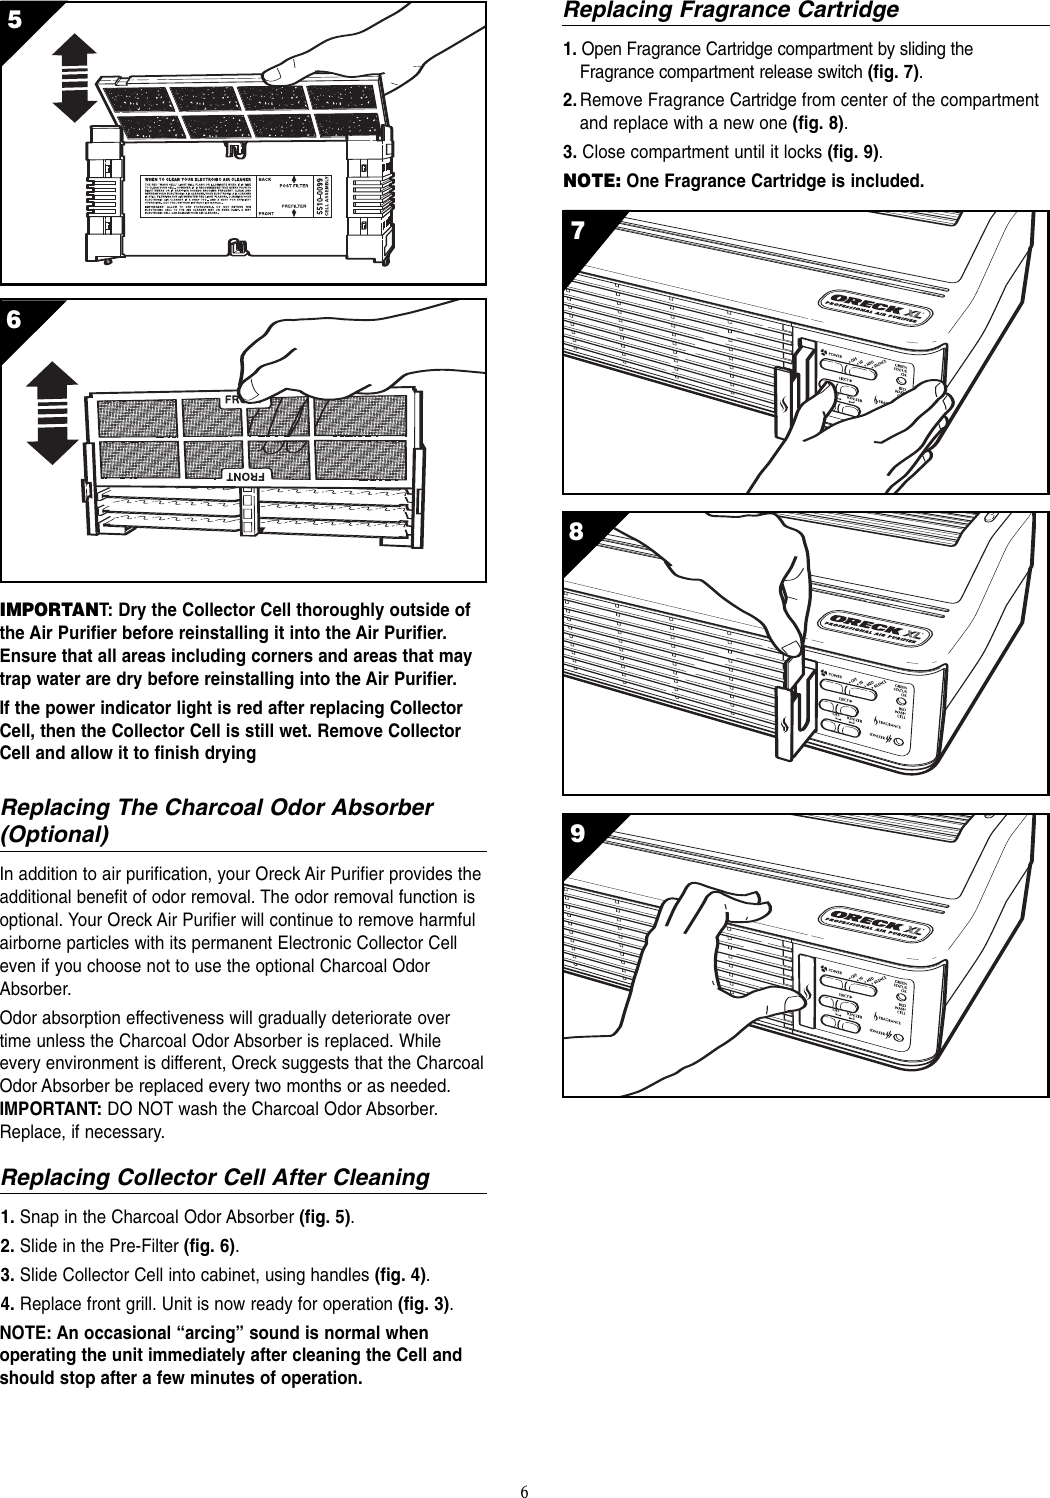 Page 6 of 8 - Oreck Oreck-Air8-Series-Users-Manual- Air 8 Manual Rev B  Oreck-air8-series-users-manual